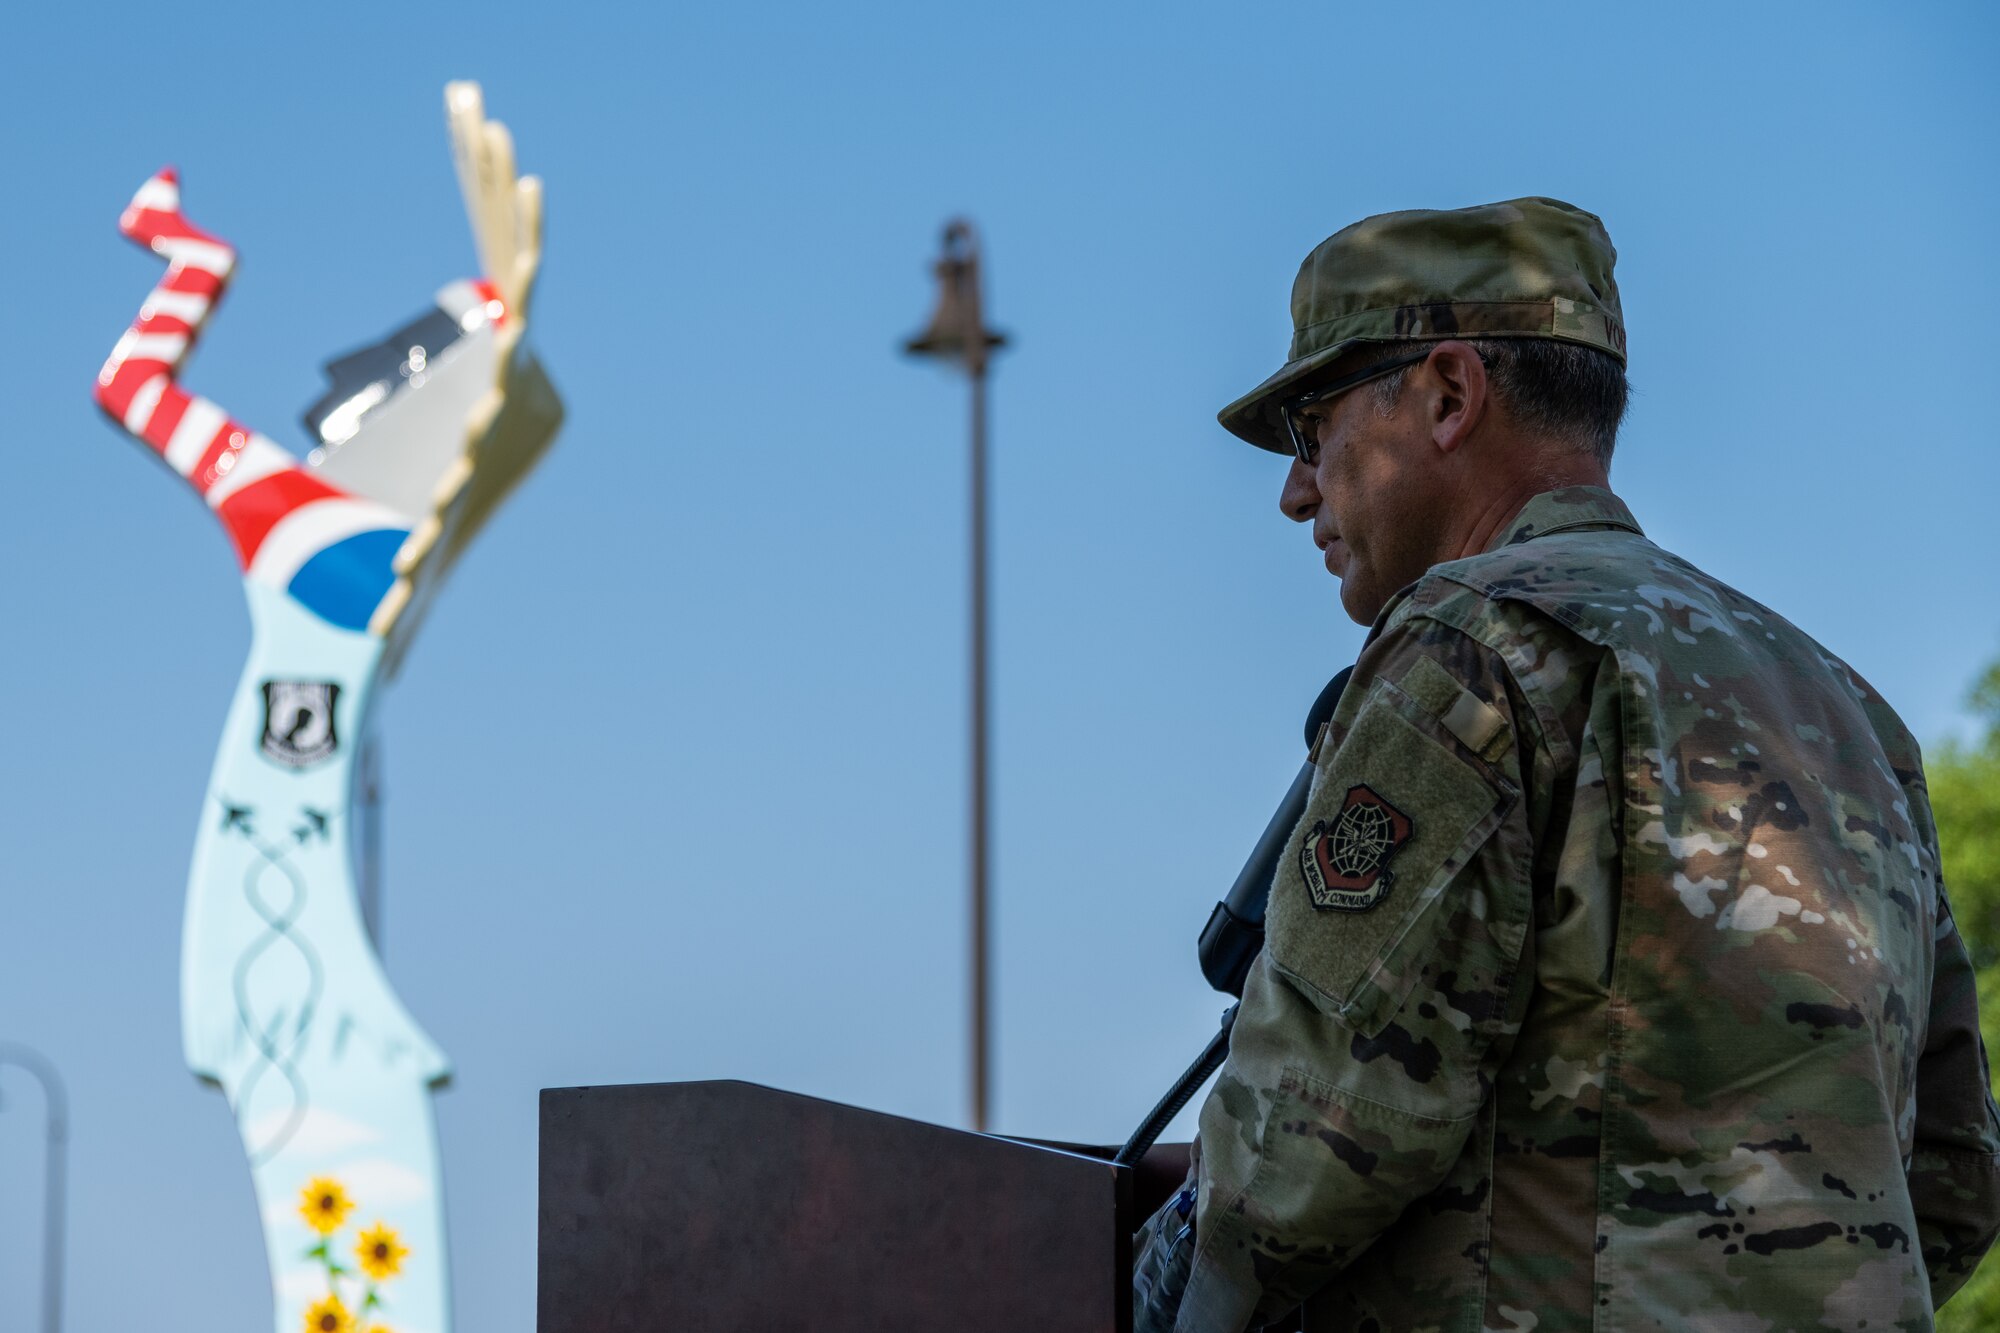 Col. Nate Vogel, 22nd Air Refueling Wing commander, gives a speech at the unveiling of the Keeper of the Plains replica donated to the base July 23, 2021, at McConnell Air Force Base, Kansas. The ten-foot-tall Keeper was donated by the Friends of McConnell organization and designed by Vincent Fredericksen, 22nd Civil Engineer Squadron base architect, and Staff Sgt. Trevor Bjelke, former 22nd Communications Squadron network infrastructure technician. (U.S. Air Force photo by Senior Airman Skyler Combs)